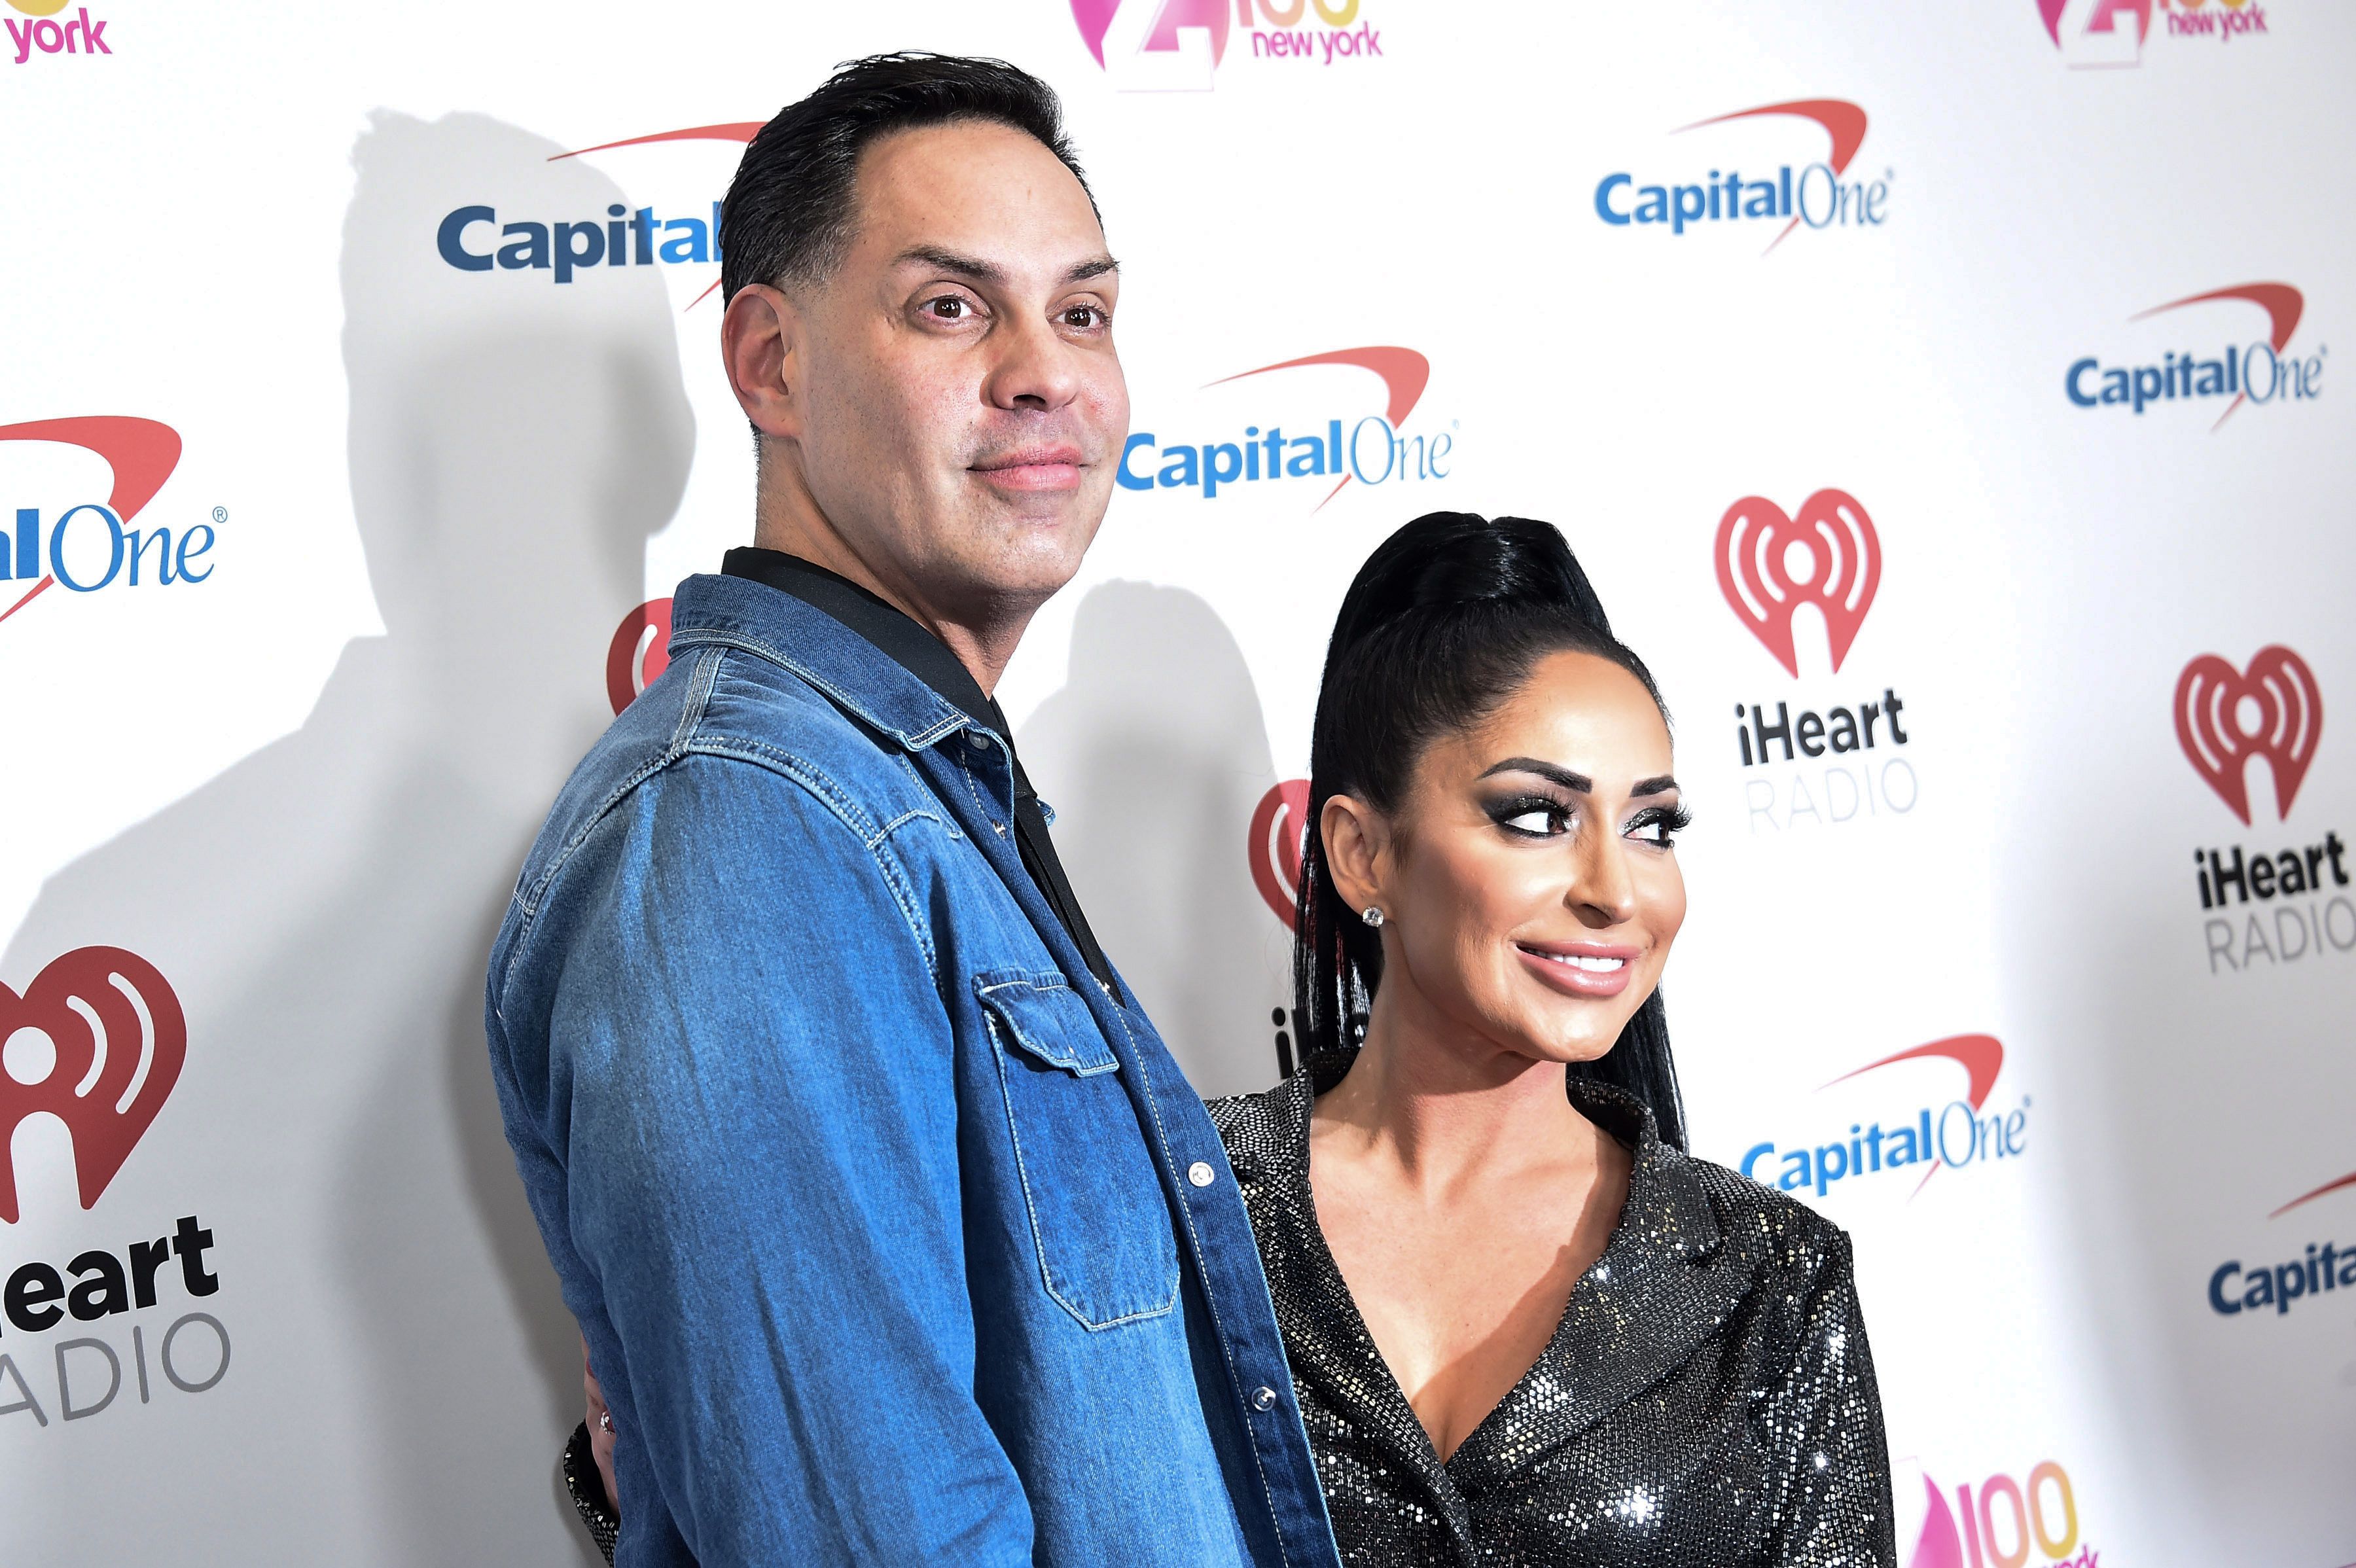 Chris Larangeira and Angelina Pivarnick pose at an event in 2019